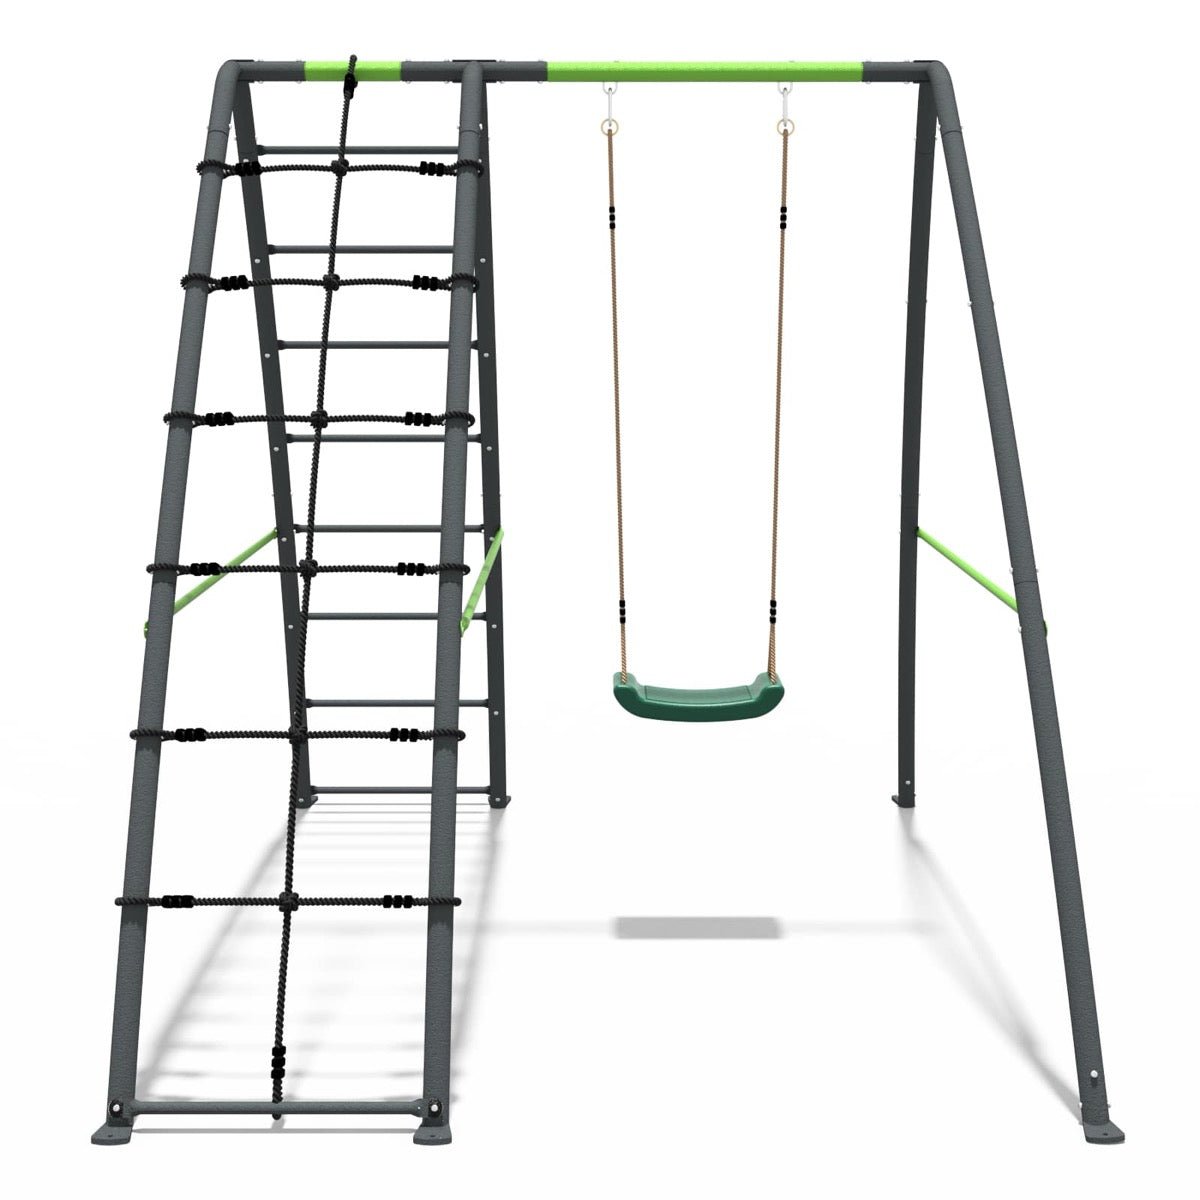 Rebo Steel Series Metal Swing Set with Up and Over wall - Single Swing Green